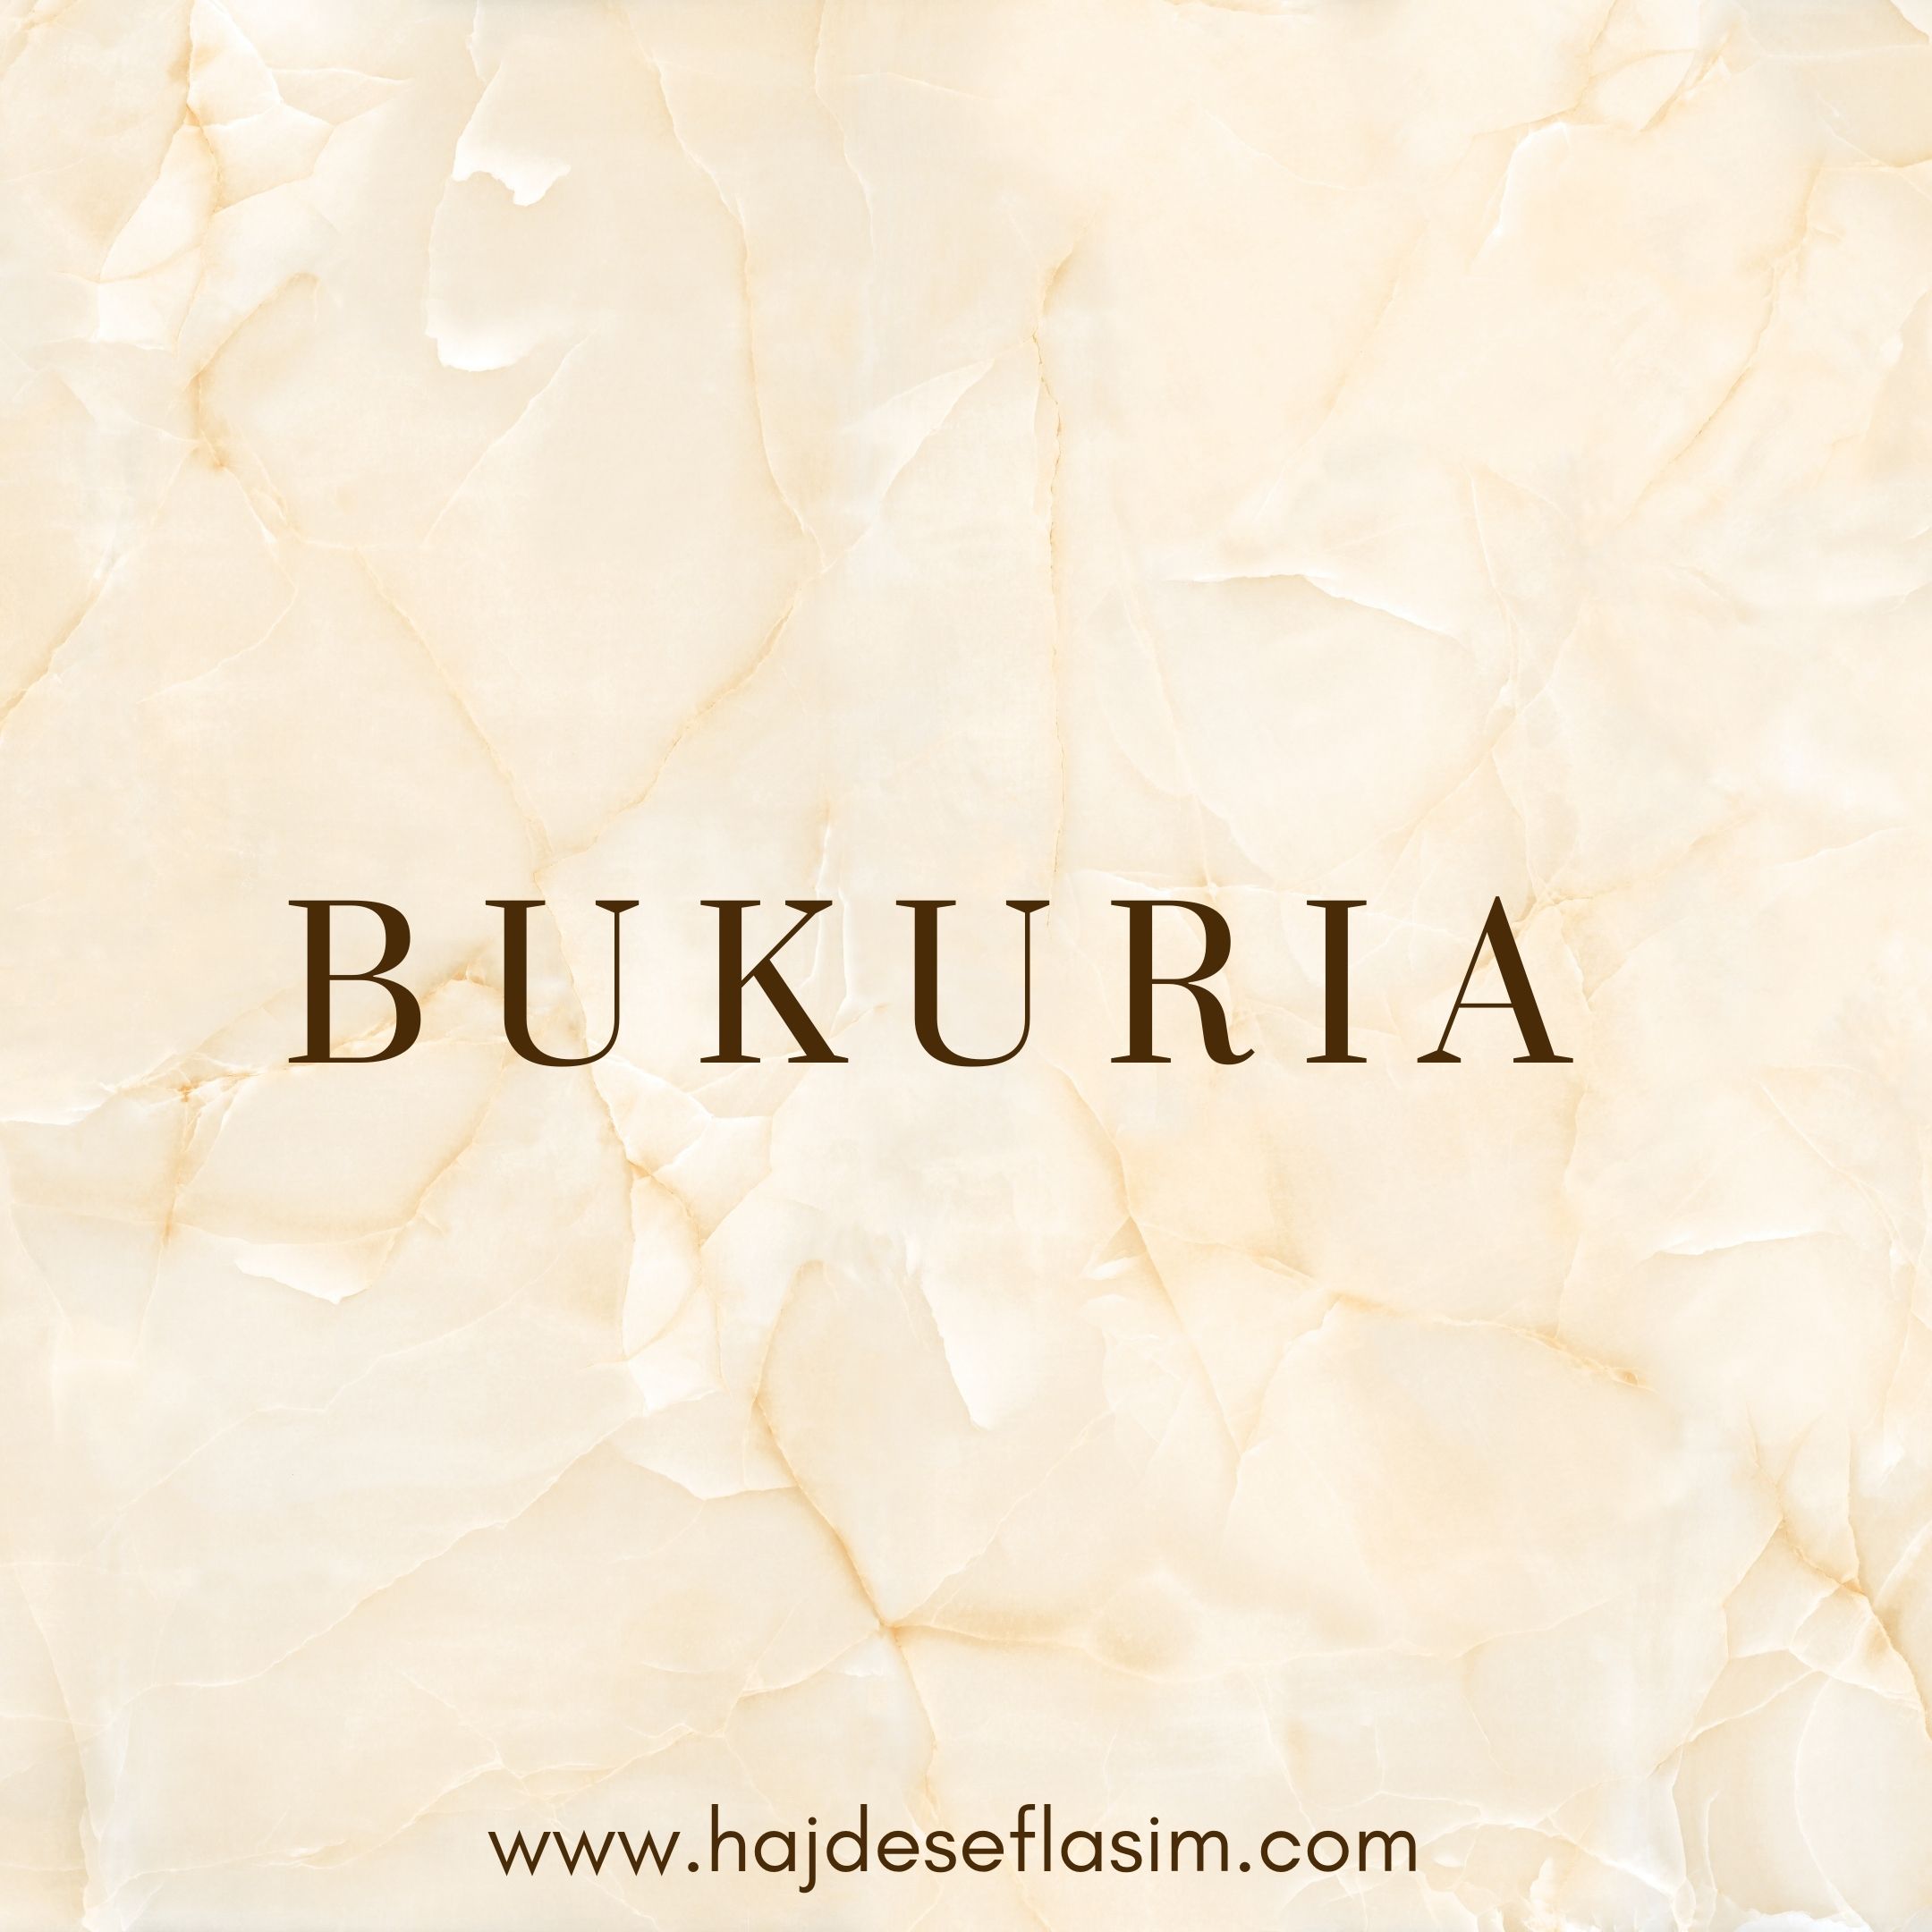 You are currently viewing Bukuria